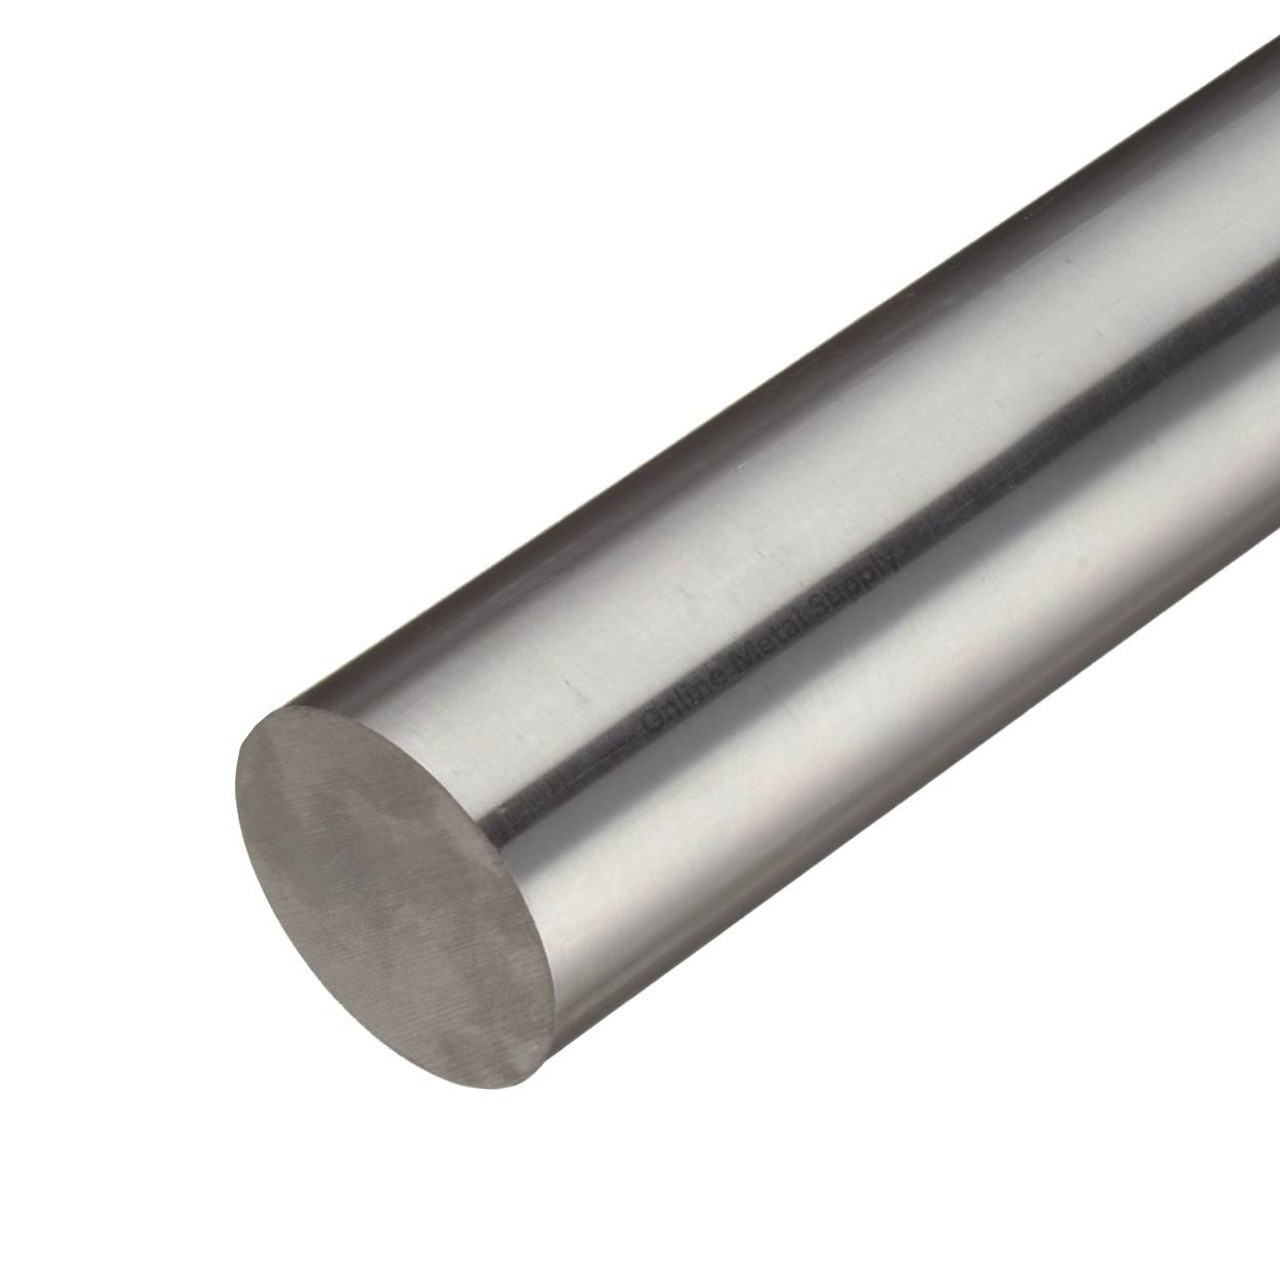 0.635 inch x 36 inches, 8620 Alloy Steel Round Rod, Turned, Ground, Polished